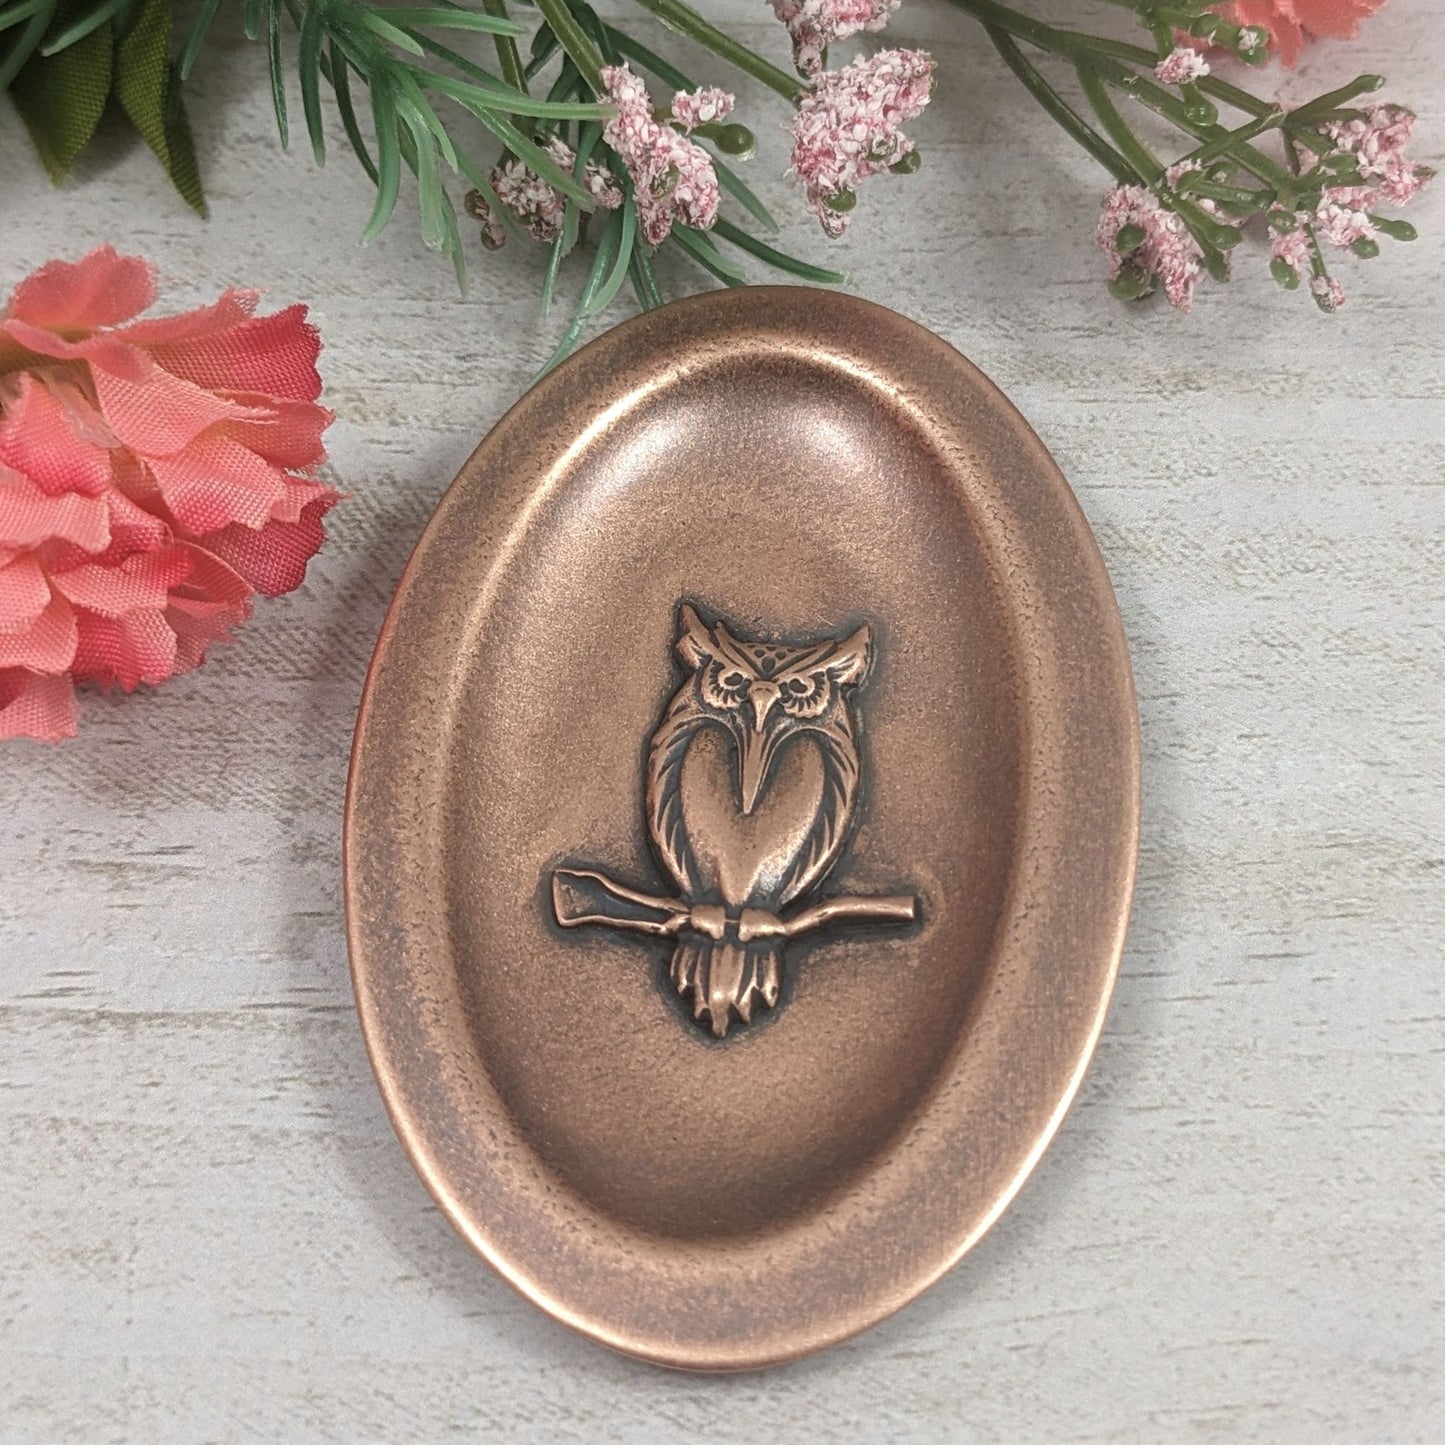 Oval ring dish made of copper. The dish has a shallow bowl with a lip around the edge. Centered on the bottom of the dish is a three-dimensional design of an owl, also made of copper. The owl is facing straight ahead and is perched on a branch. The breast is smooth and shaped like a long narrow heart. The owl hd large eyes, a pointed beak, tufted ears, and feathers around the breast and on the tail.  Staged with flowers